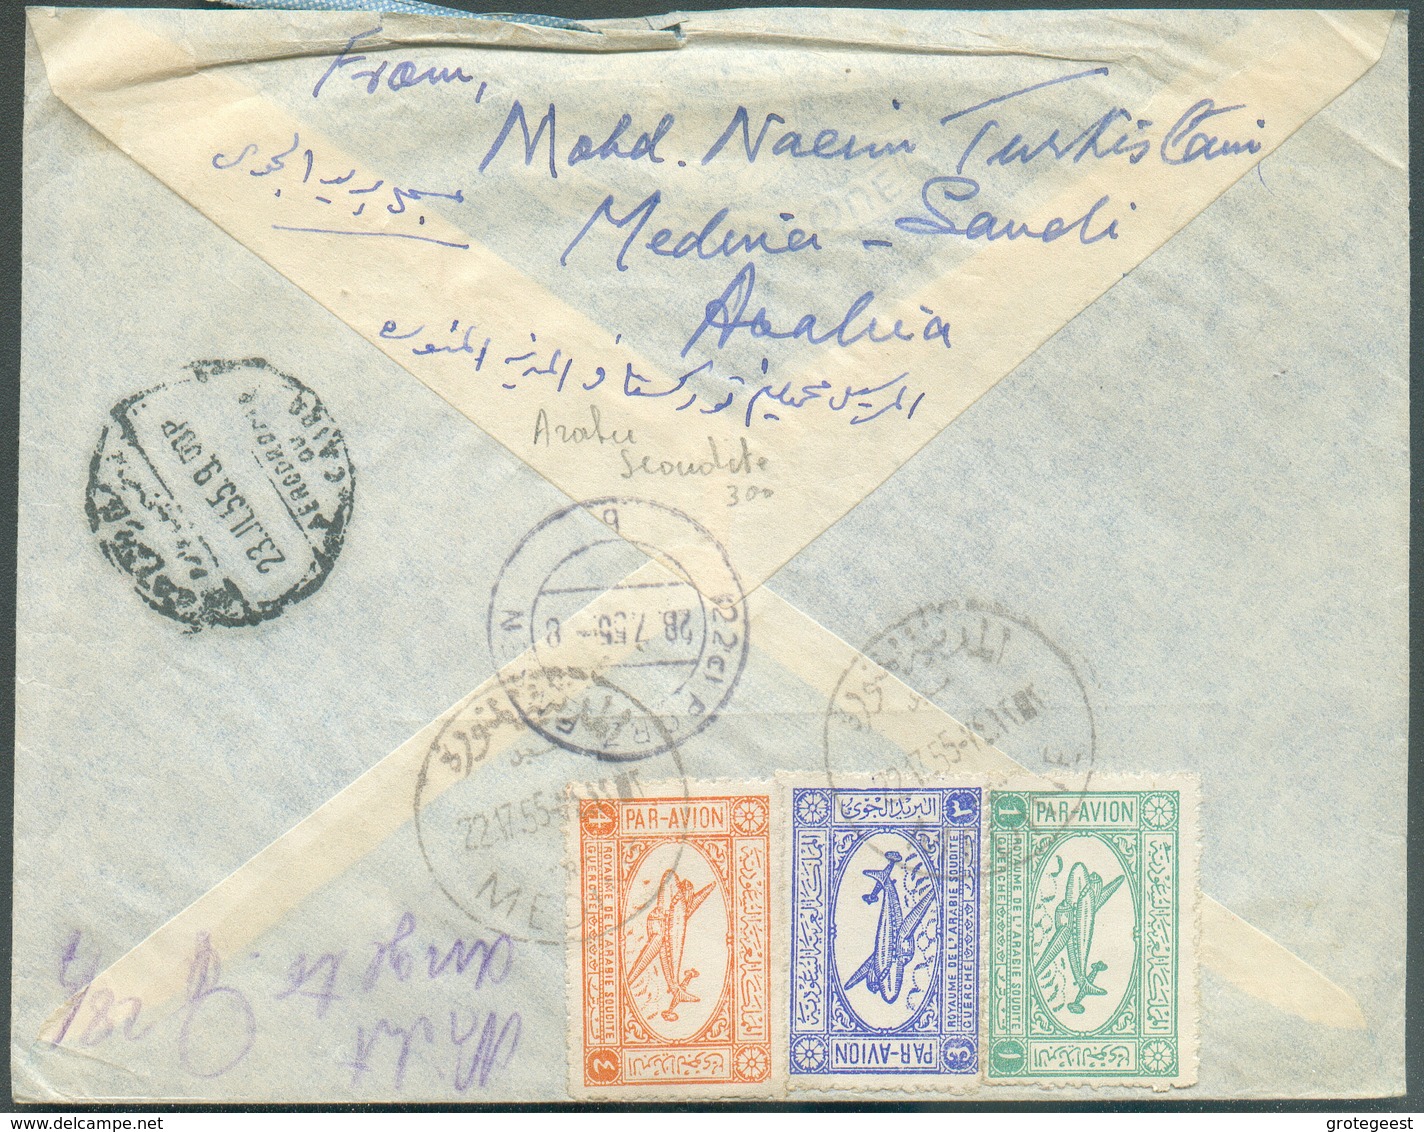 Nice Illustrated Enveloppe (SItes MOSQUEE And MINARET) Franked 1 + 3 + 4 Canc. MEDINE By Airplane To Germany 22 Jul. 195 - Saoedi-Arabië